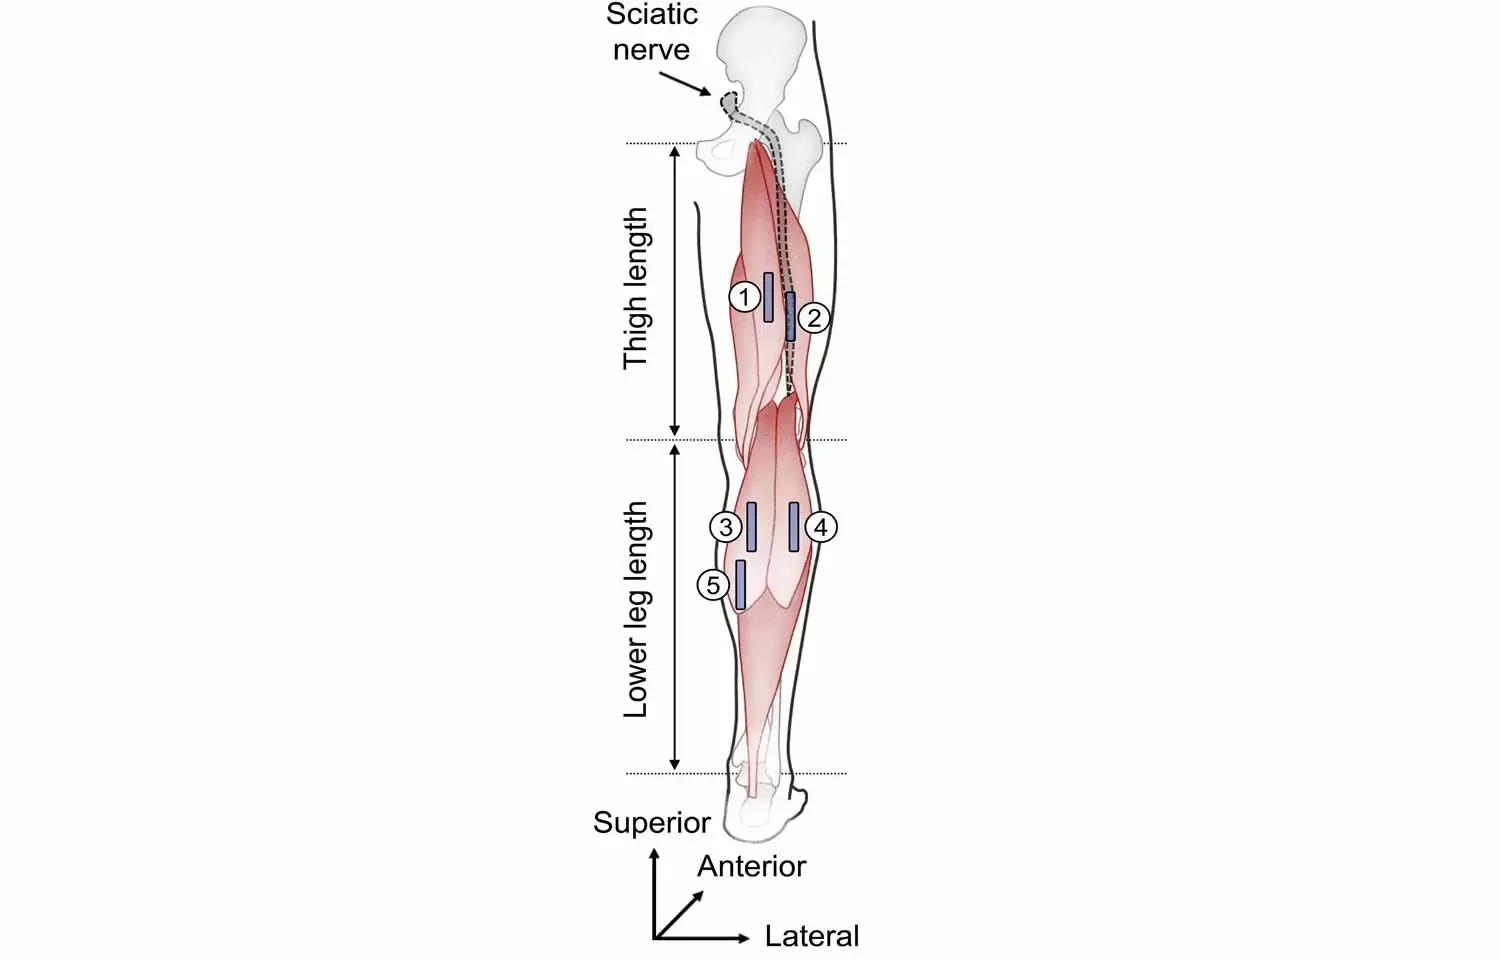 Age not just a number: Causes of joint stiffness differ between older and younger adults